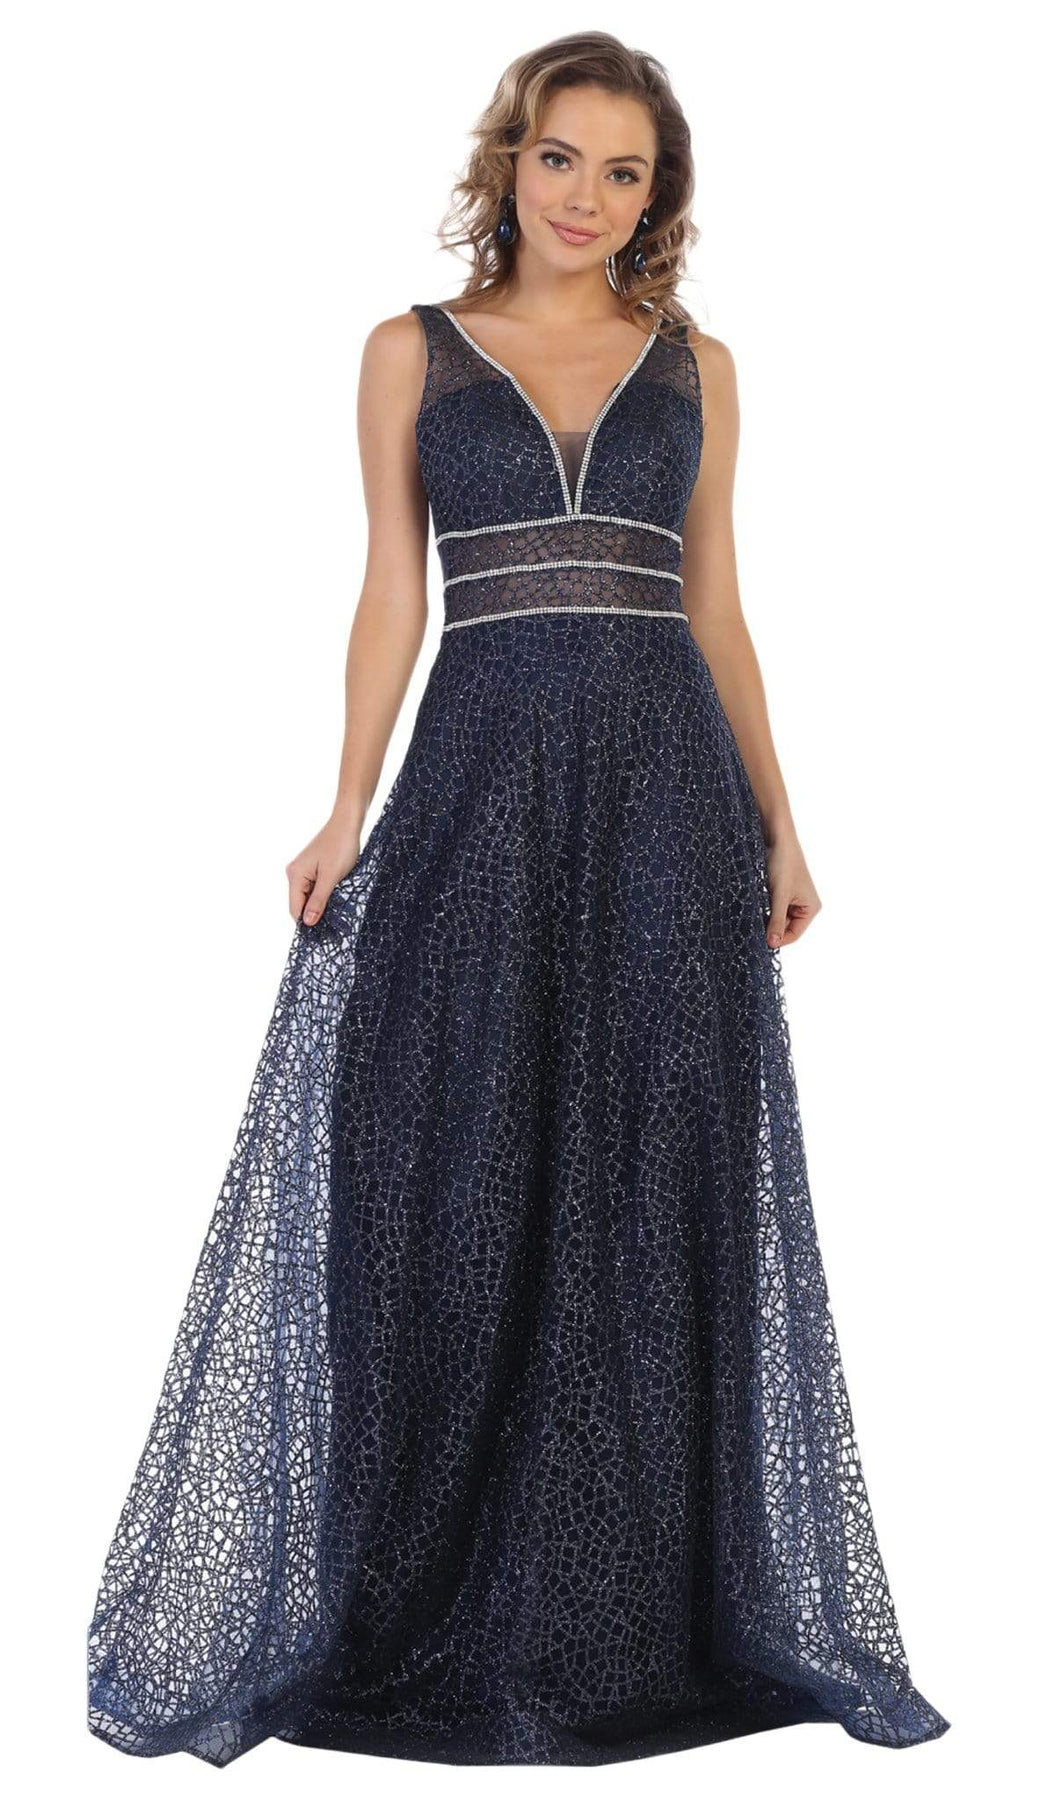 May Queen - MQ-1623 Sleeveless V-Neck Glitter Tulle A-Line Gown Special Occasion Dress 2 / Navy